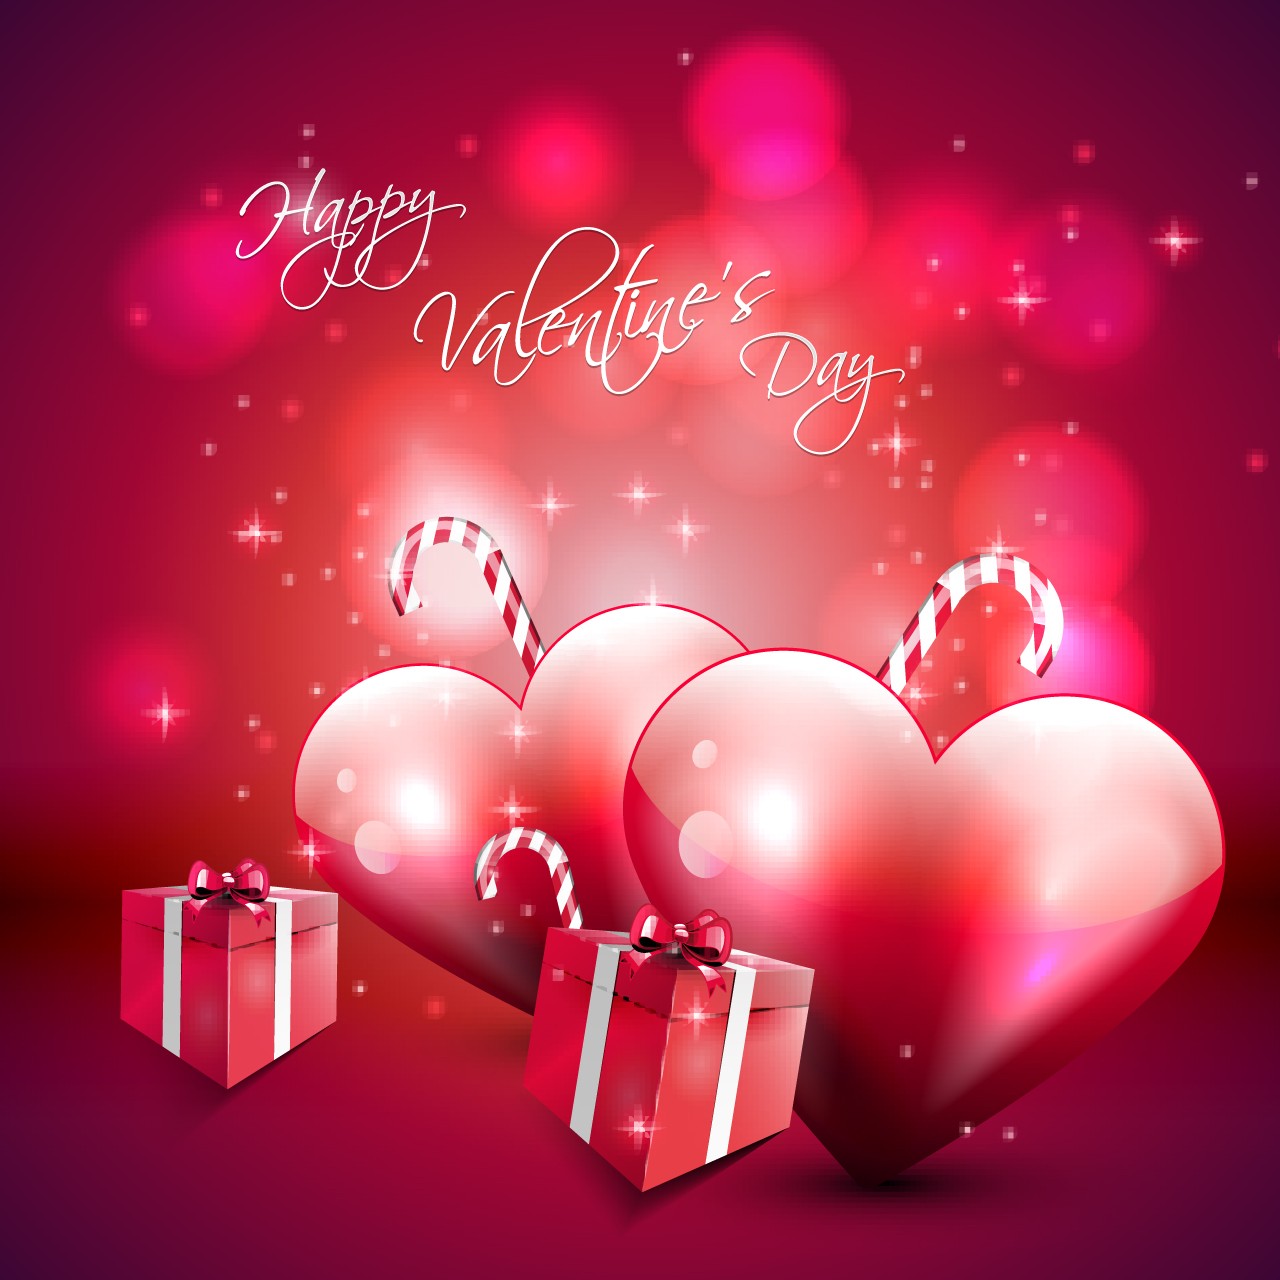 Happy Valentine’s Day Wallpapers Photo On Hd Wallpaper - Cute Happy Valentines Day - HD Wallpaper 